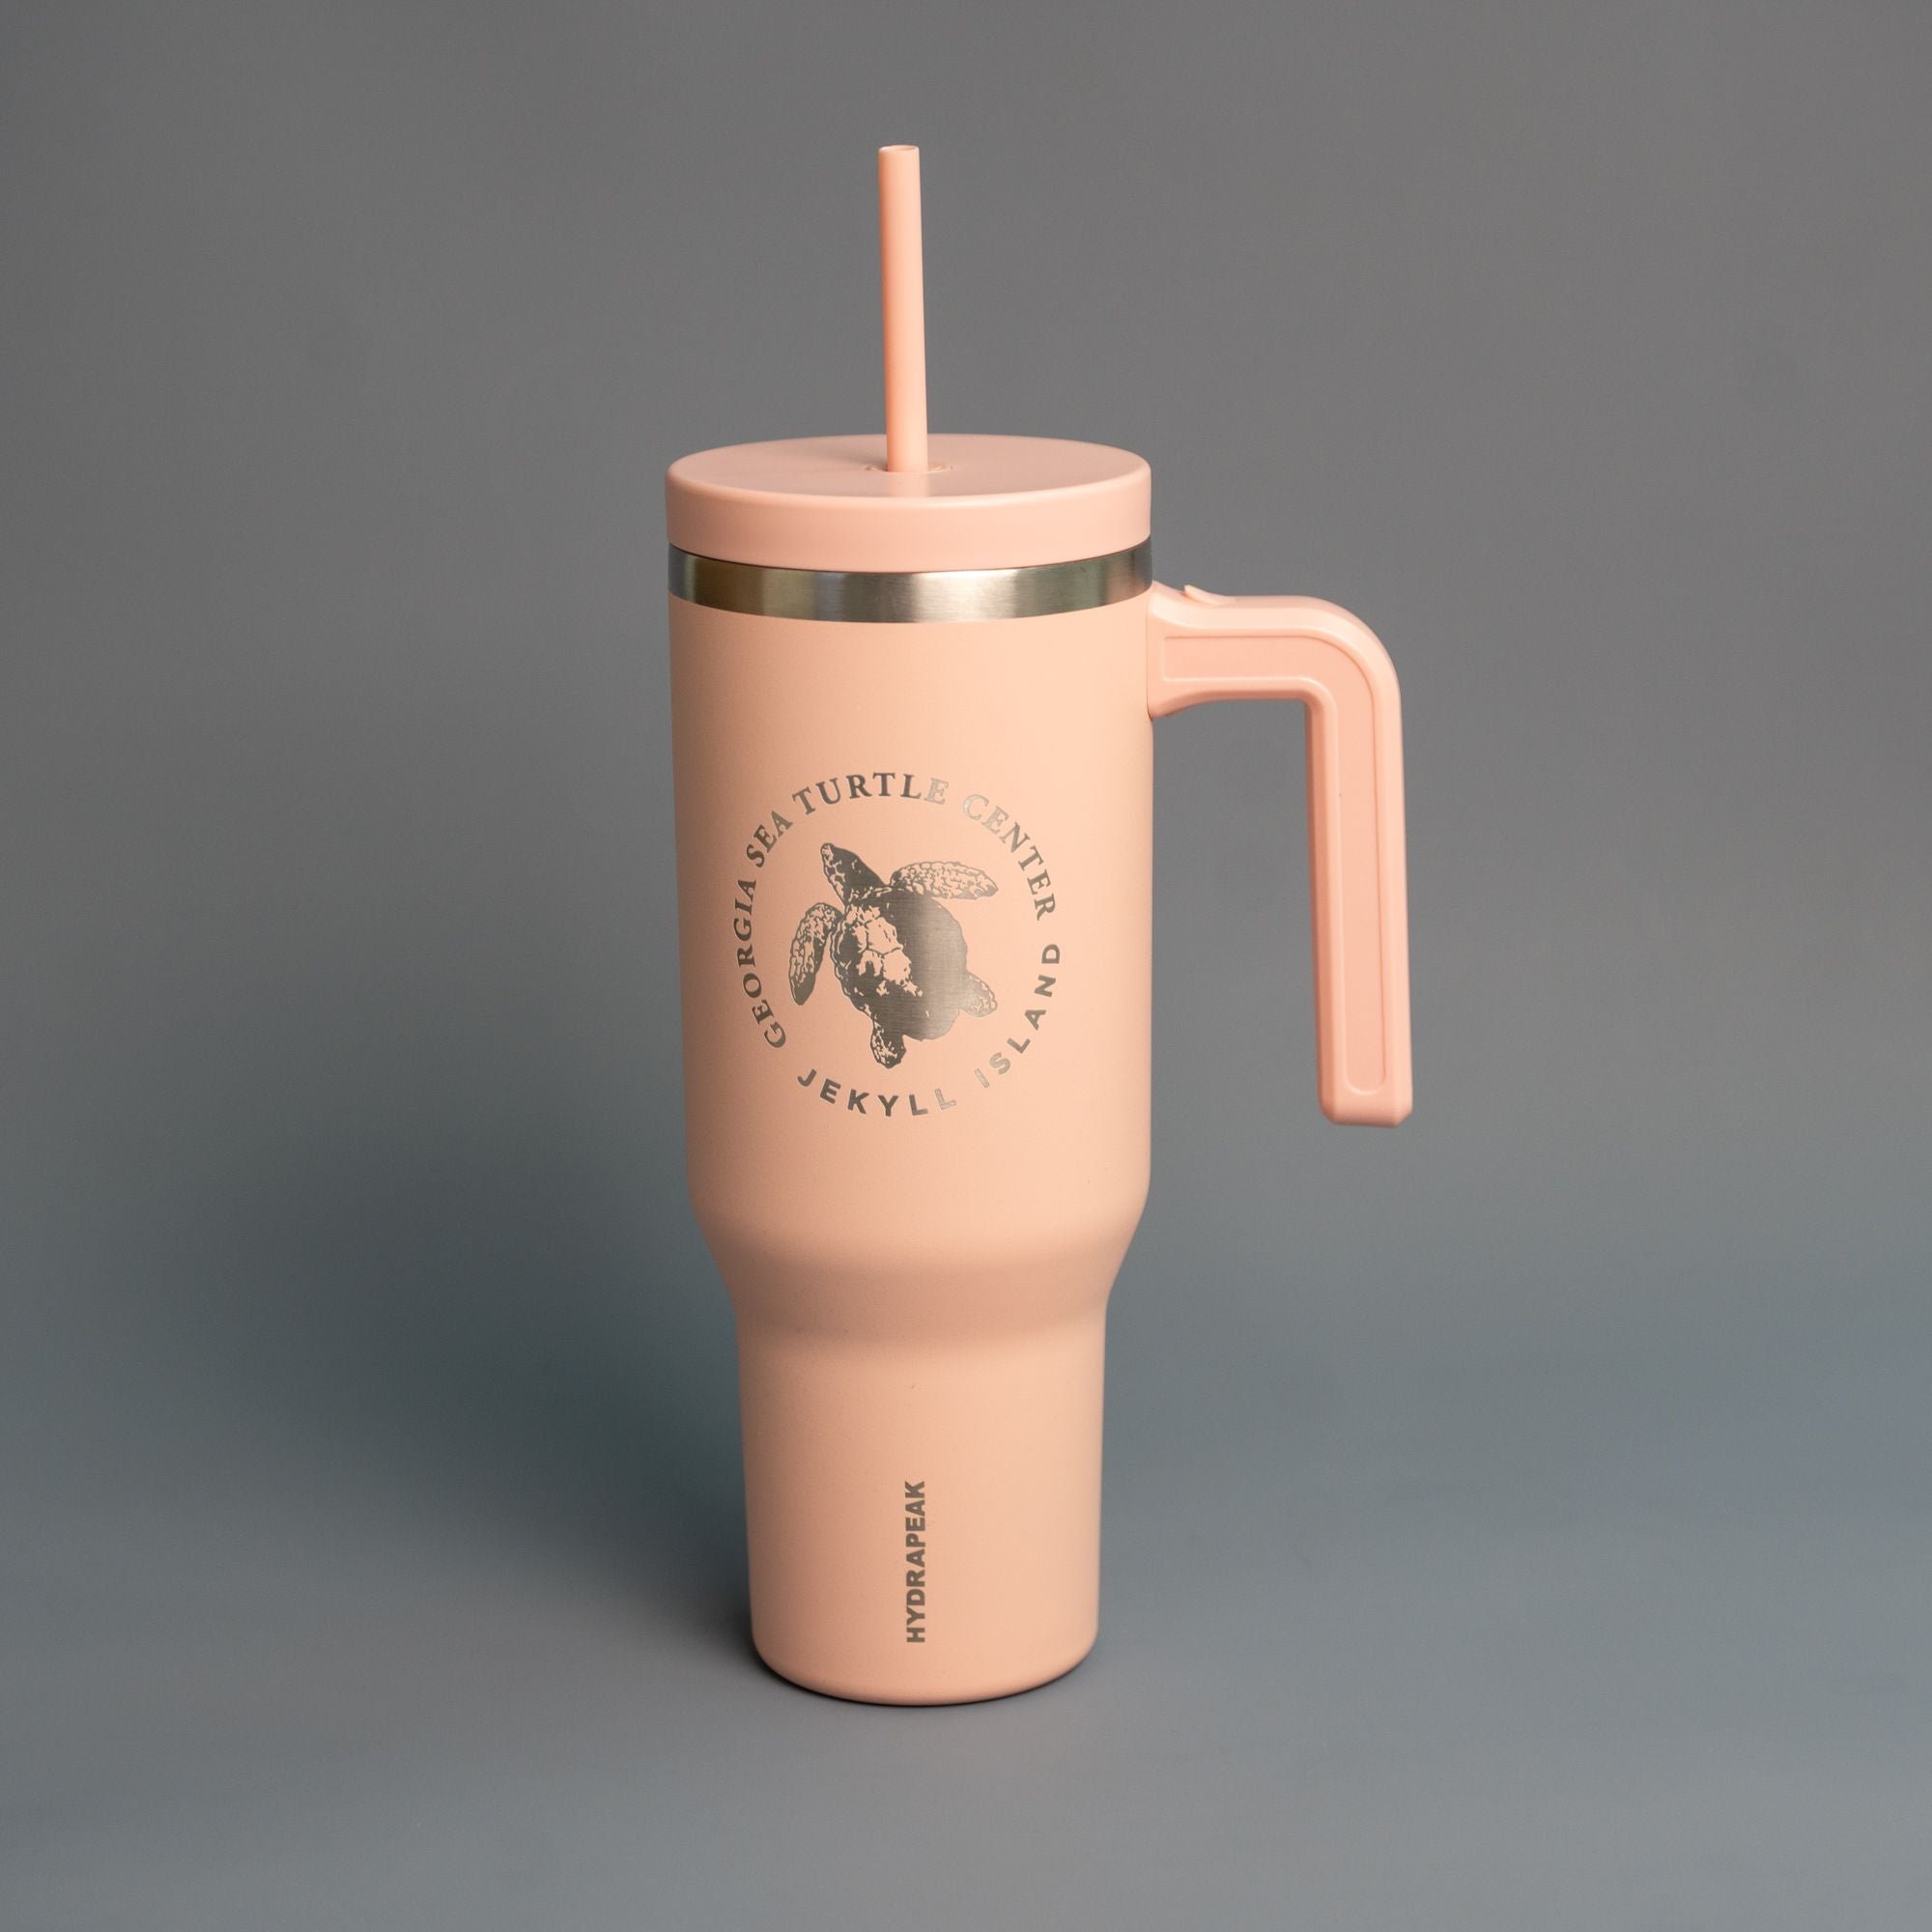 It's All Connected - Orca - 40oz Tumbler with Handle - Because Tees